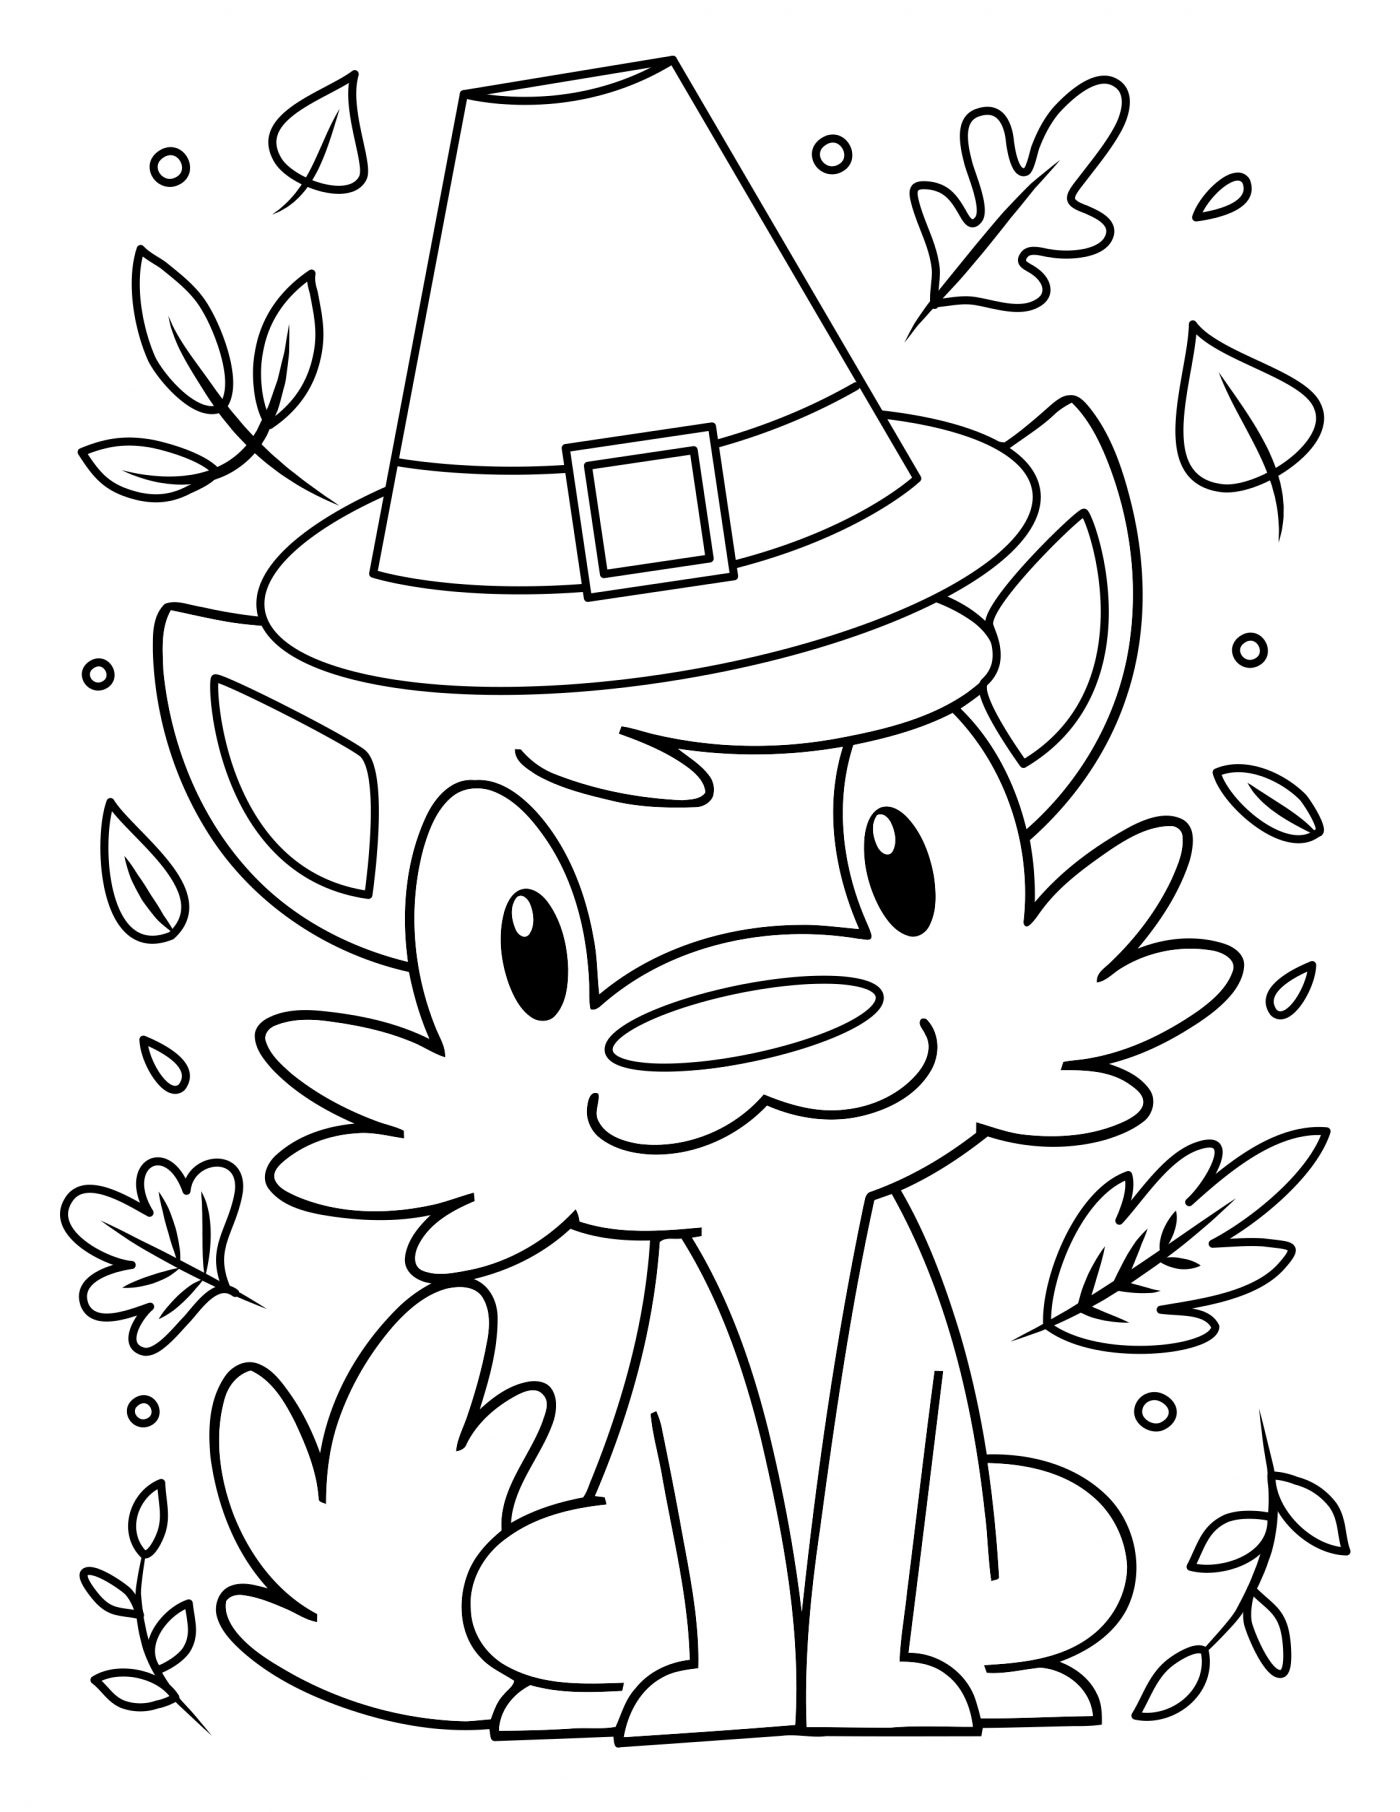 Thanksgiving A Furry Friend Coloring Page